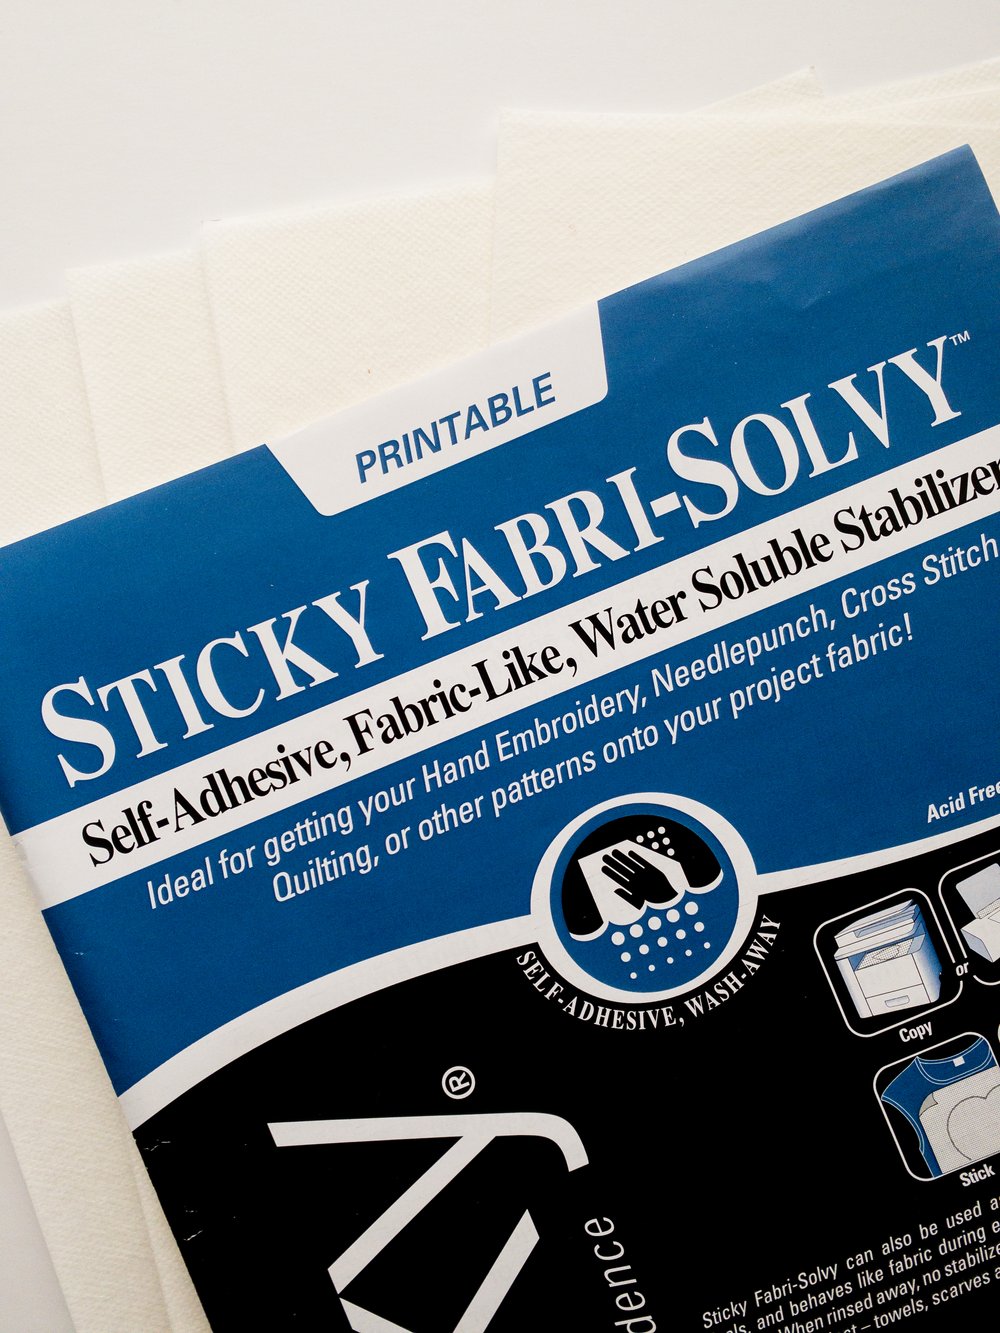  Sulky Paper Solvy Water Soluble Fabric stabilizer, 8, White